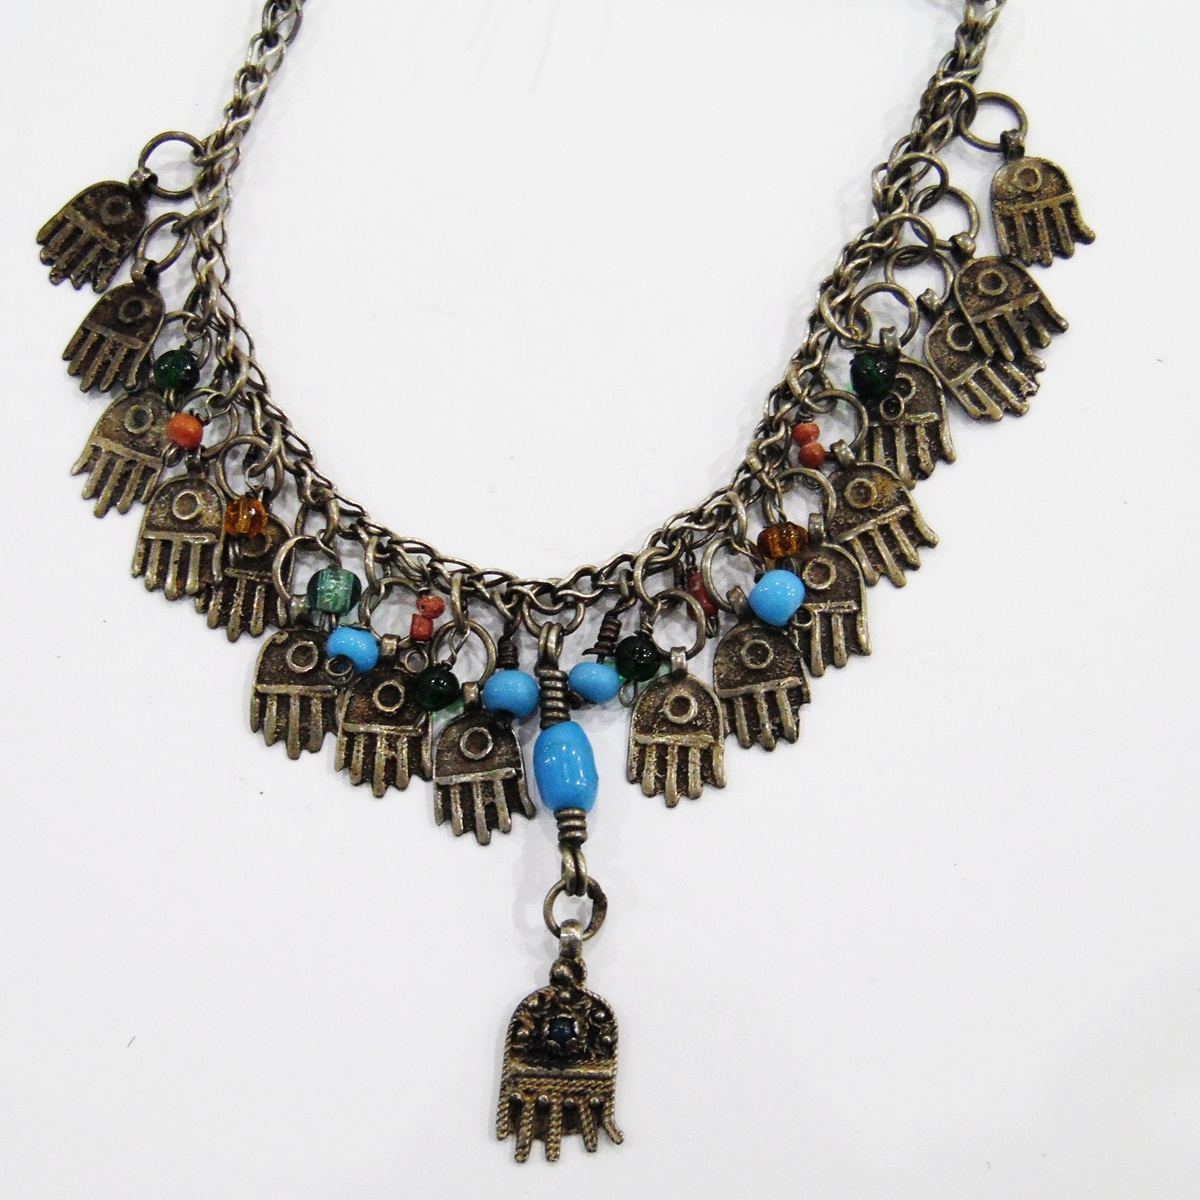 North African white metal necklace hung with glass beads and hamsa hand charms